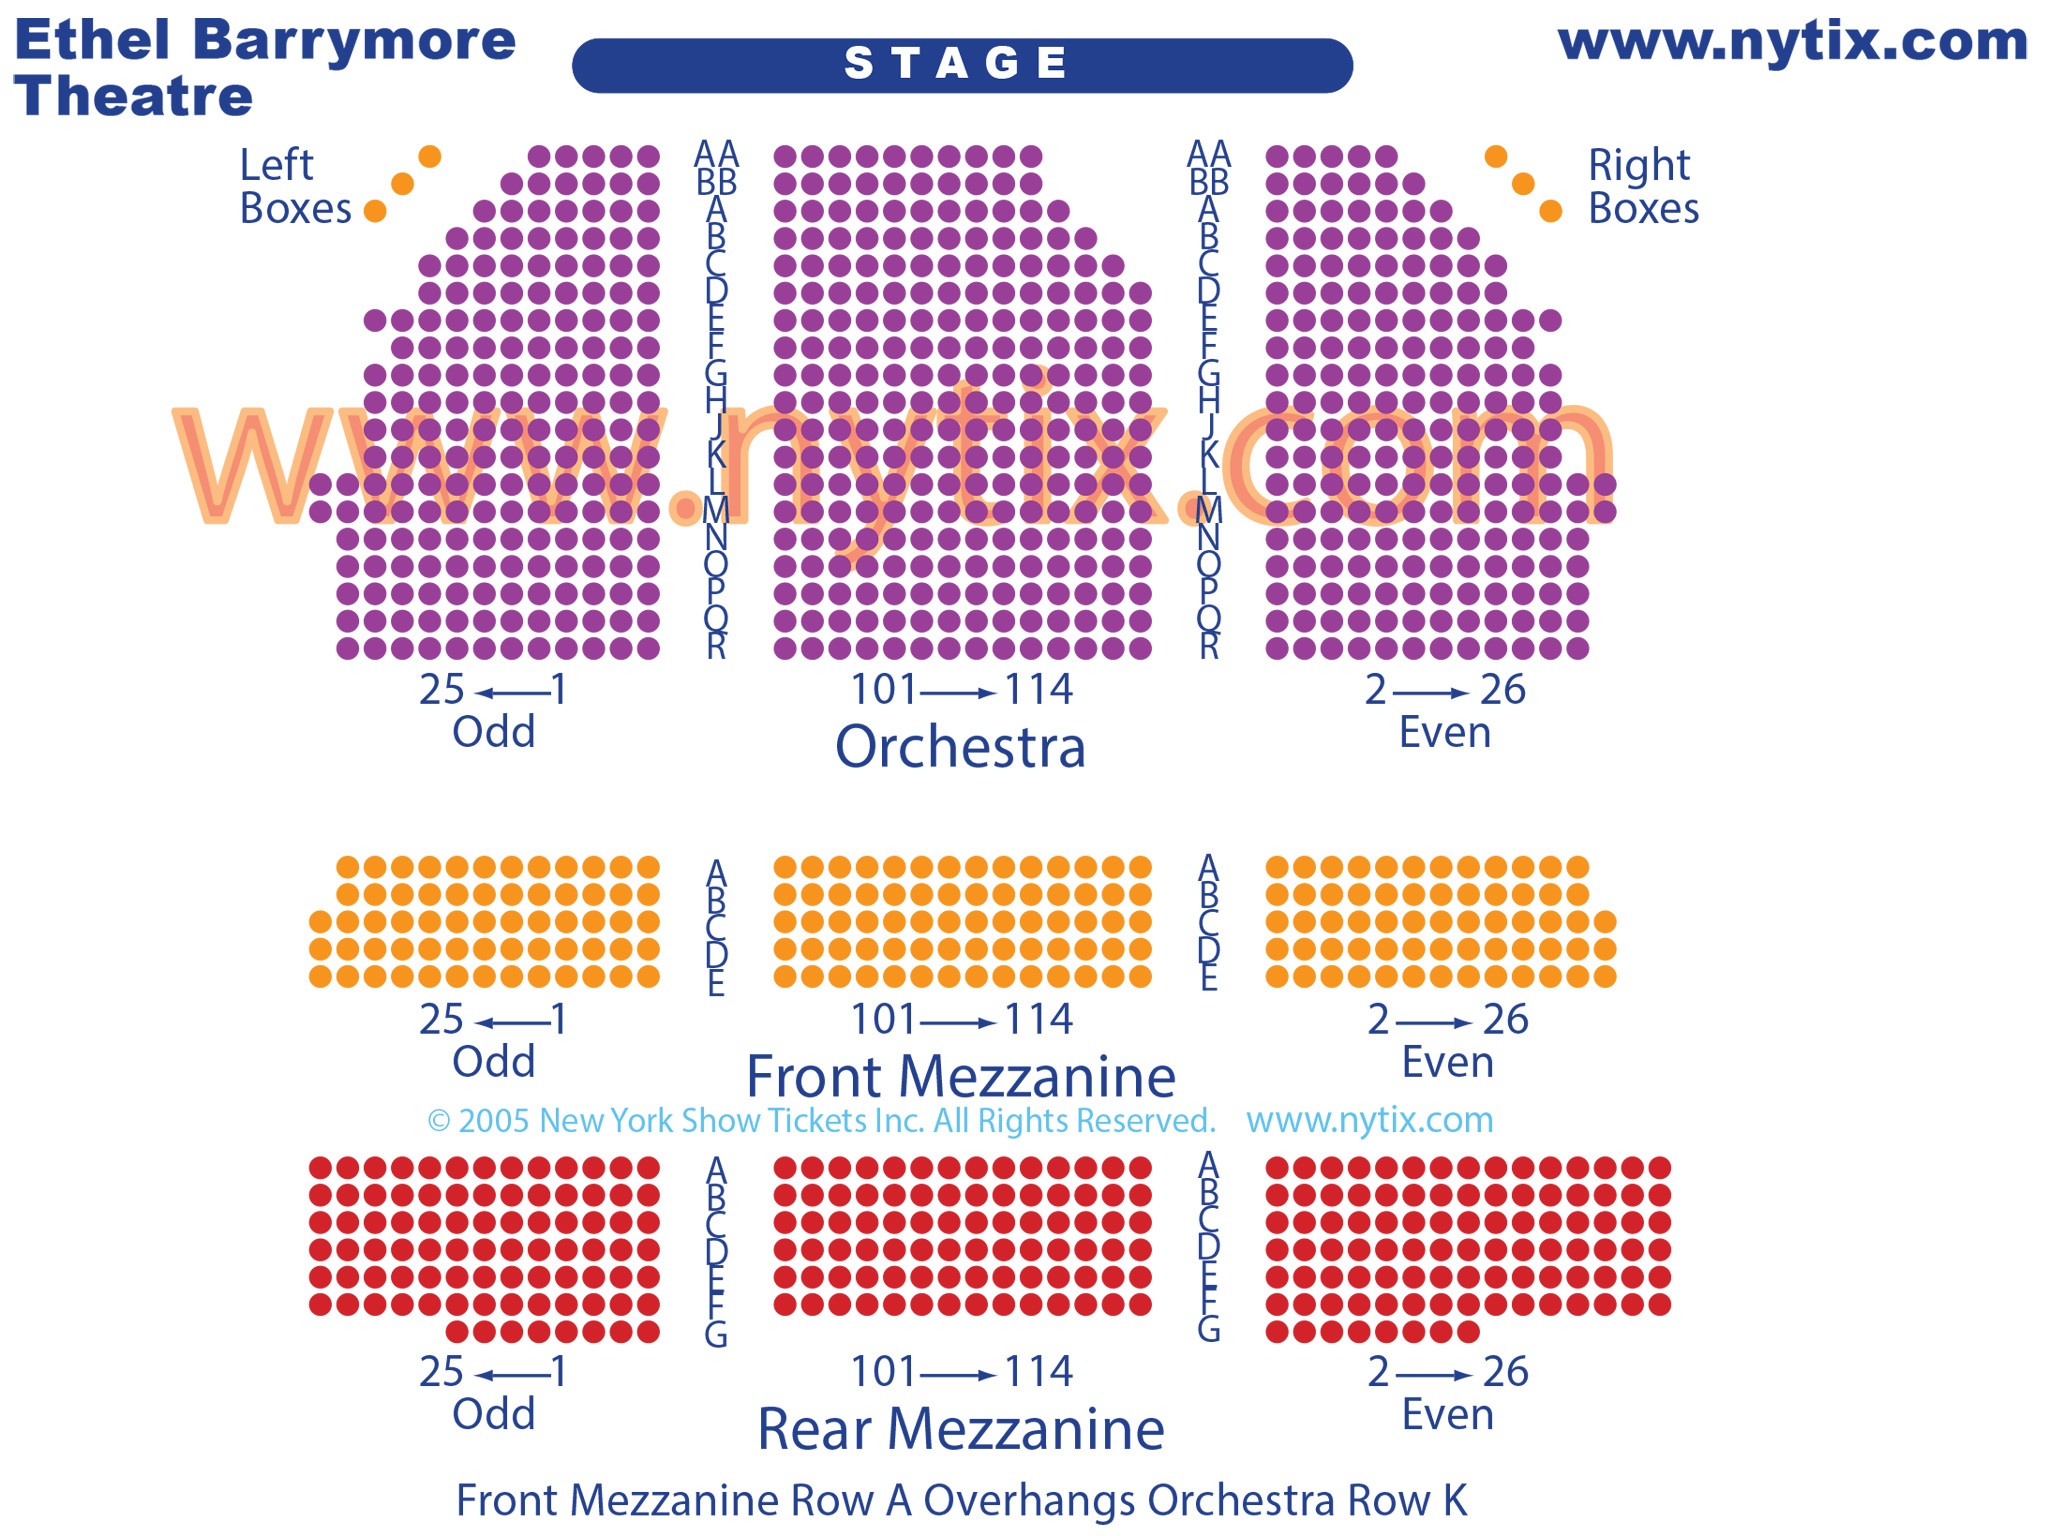 Ethel Barrymore Theatre Seating Chart